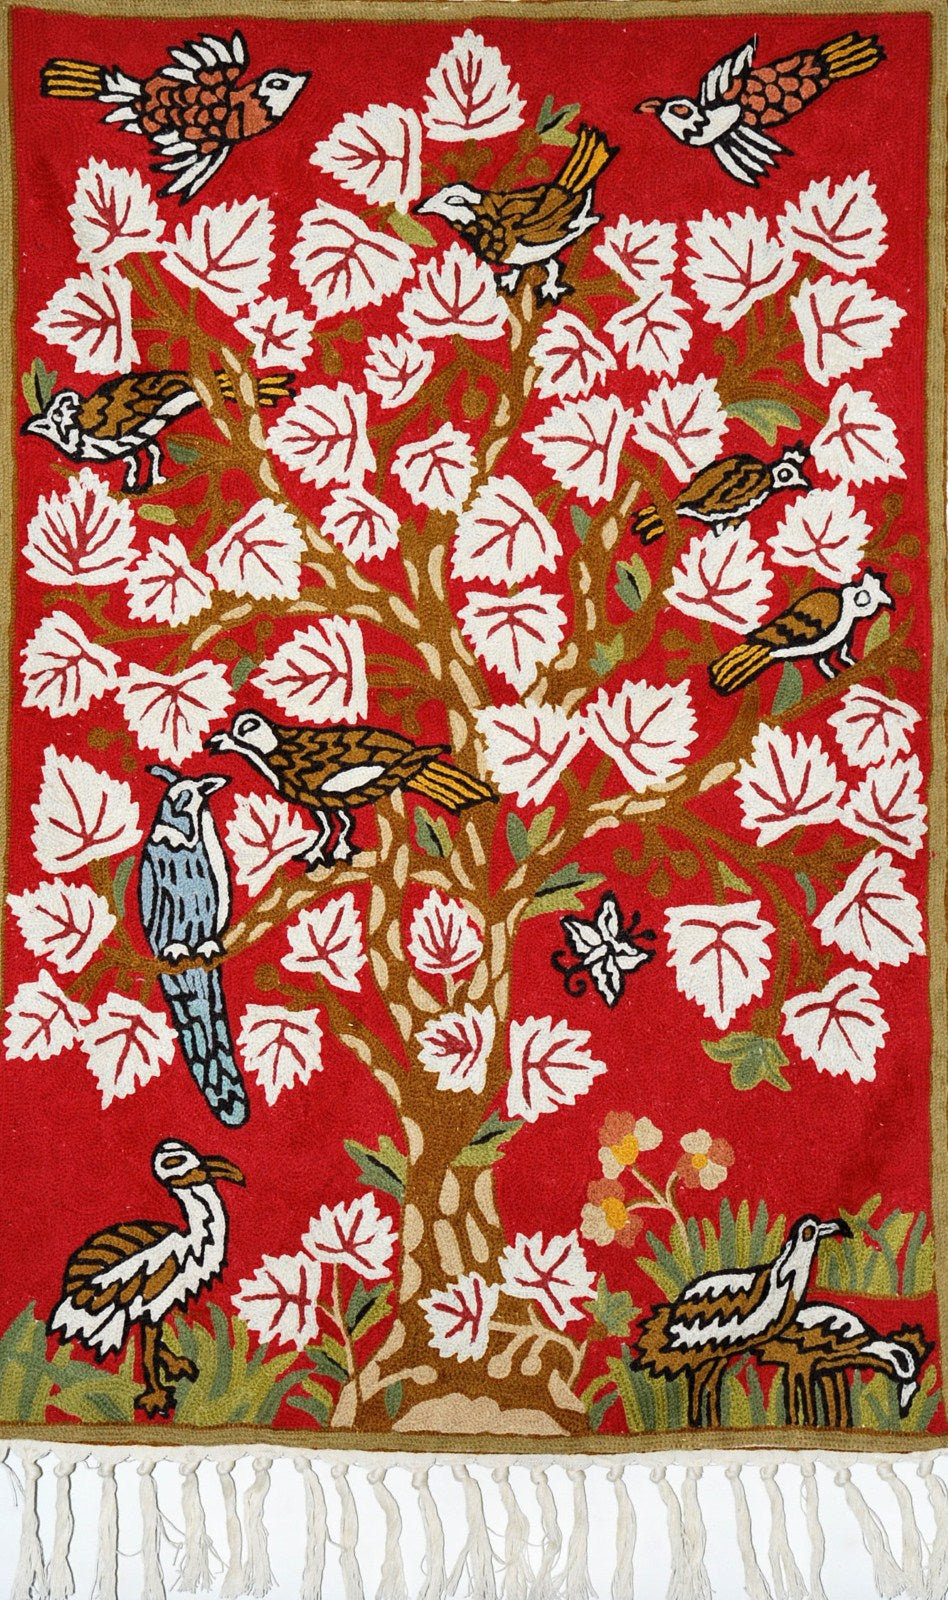 ChainStitch Tapestry Woolen Area Rug "Maple Tree Birds", Multicolor Embroidery 2x3 feet #CWR6115